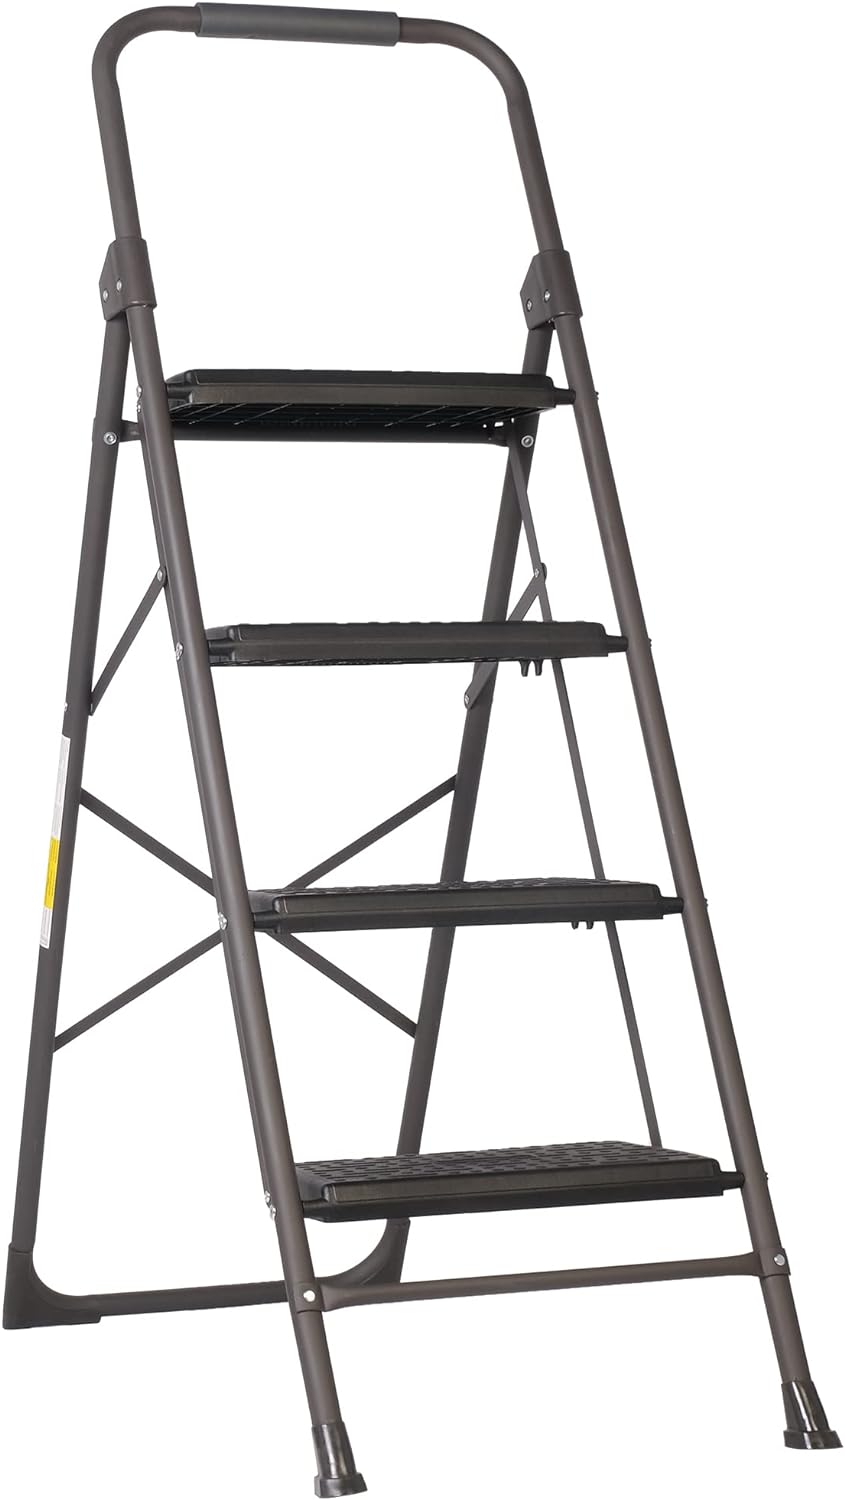 4 Step Ladder, Folding Step Stool for Adults with Handgrip Portable Lightweight Step Ladder